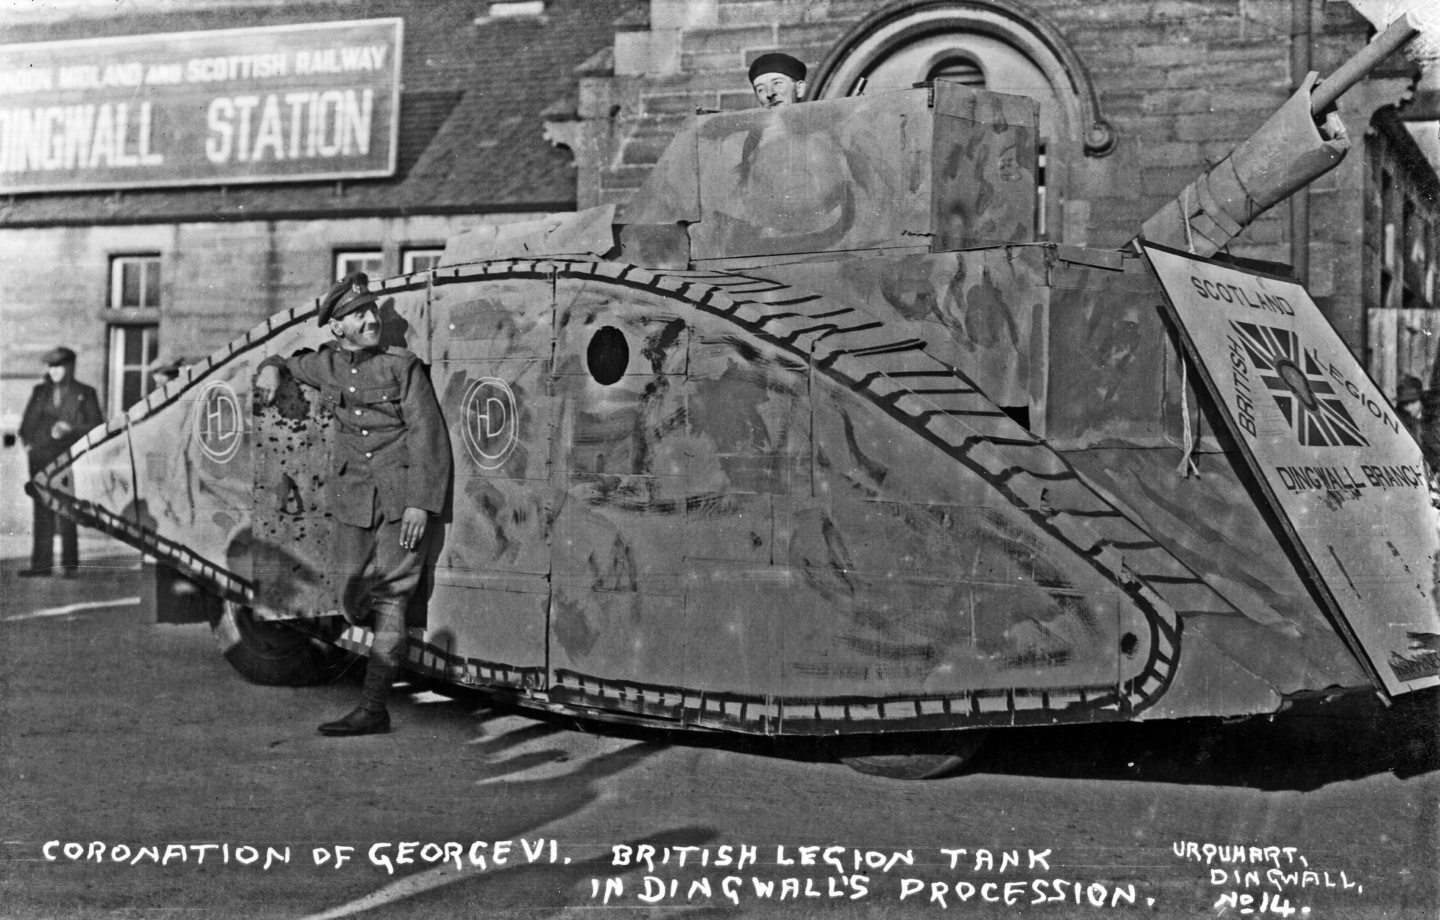 This impressive model tank was constructed in Dingwall to celebrate the coronation of King George VI in 1937.